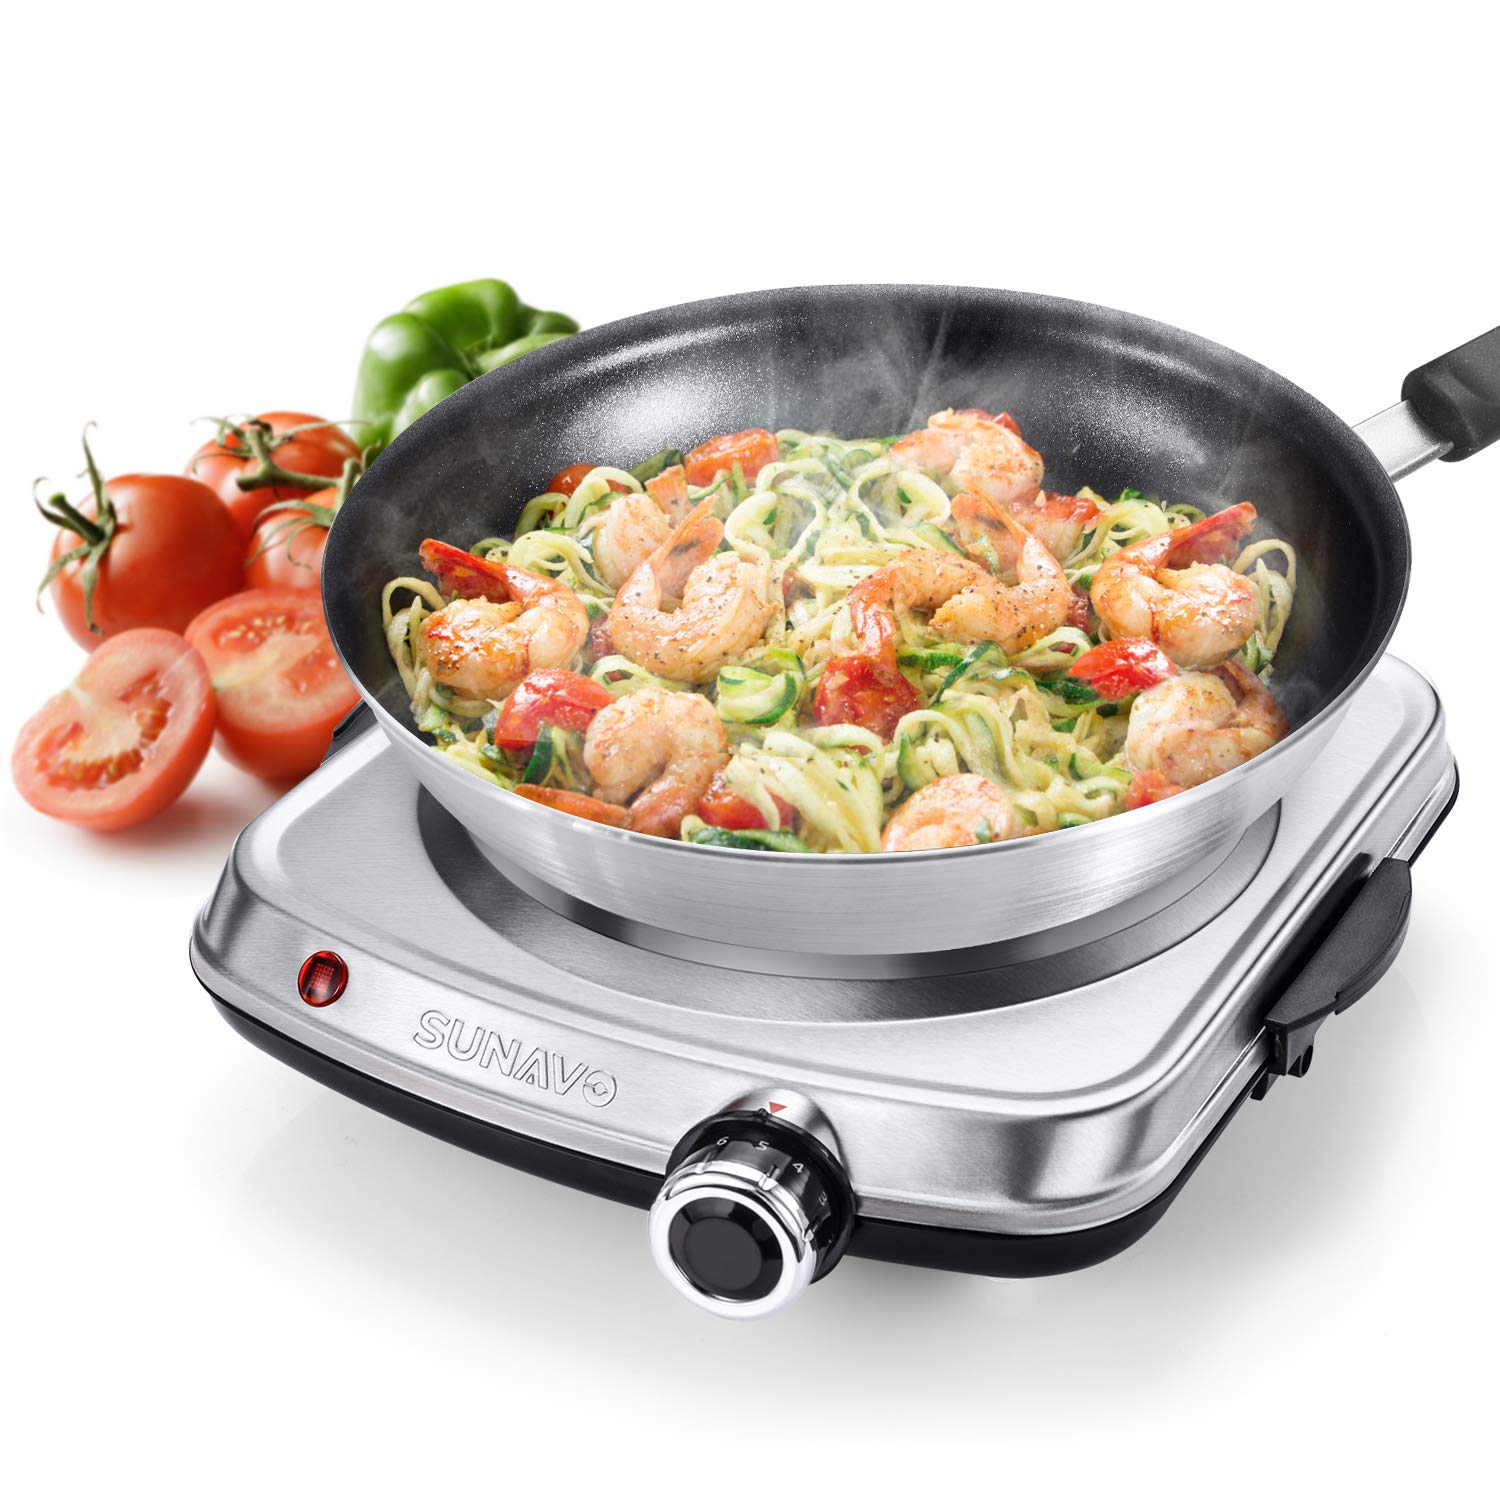 Electric Cast Iron Stovetop Hot Plate For Cooking- 1500W Single OR 180